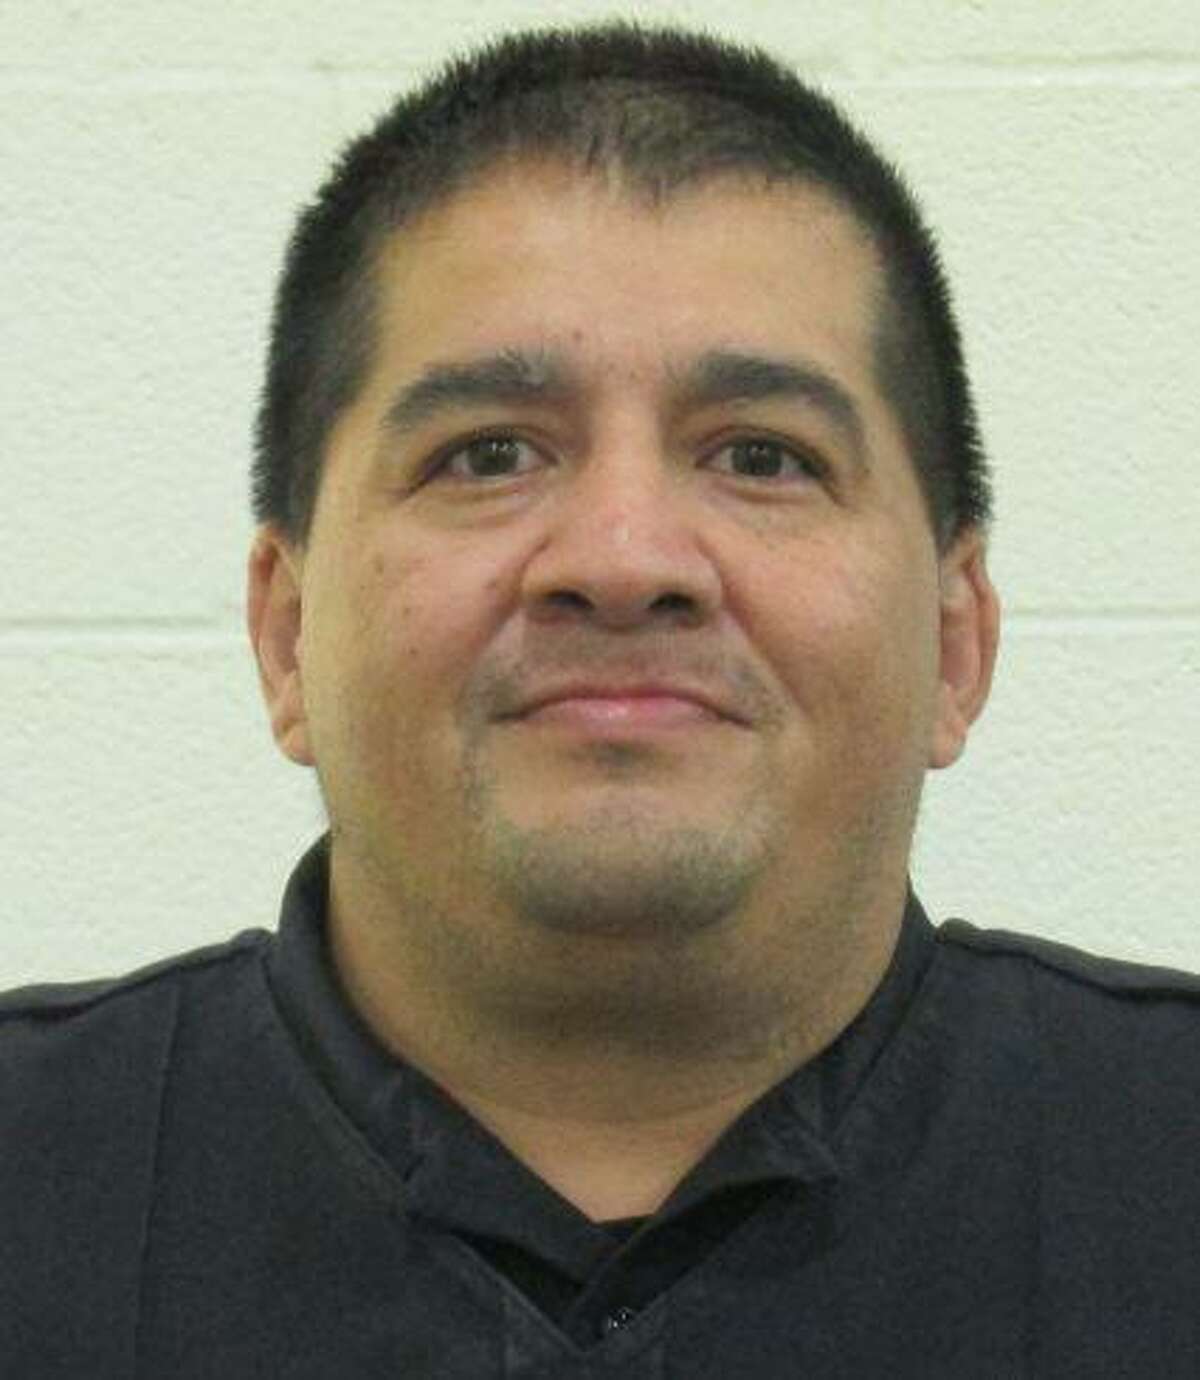 Jailer John Varela resigned from the Bexar County Sheriff’s Office Tuesday amid an investigation into his alleged actions with inmates, officials said.